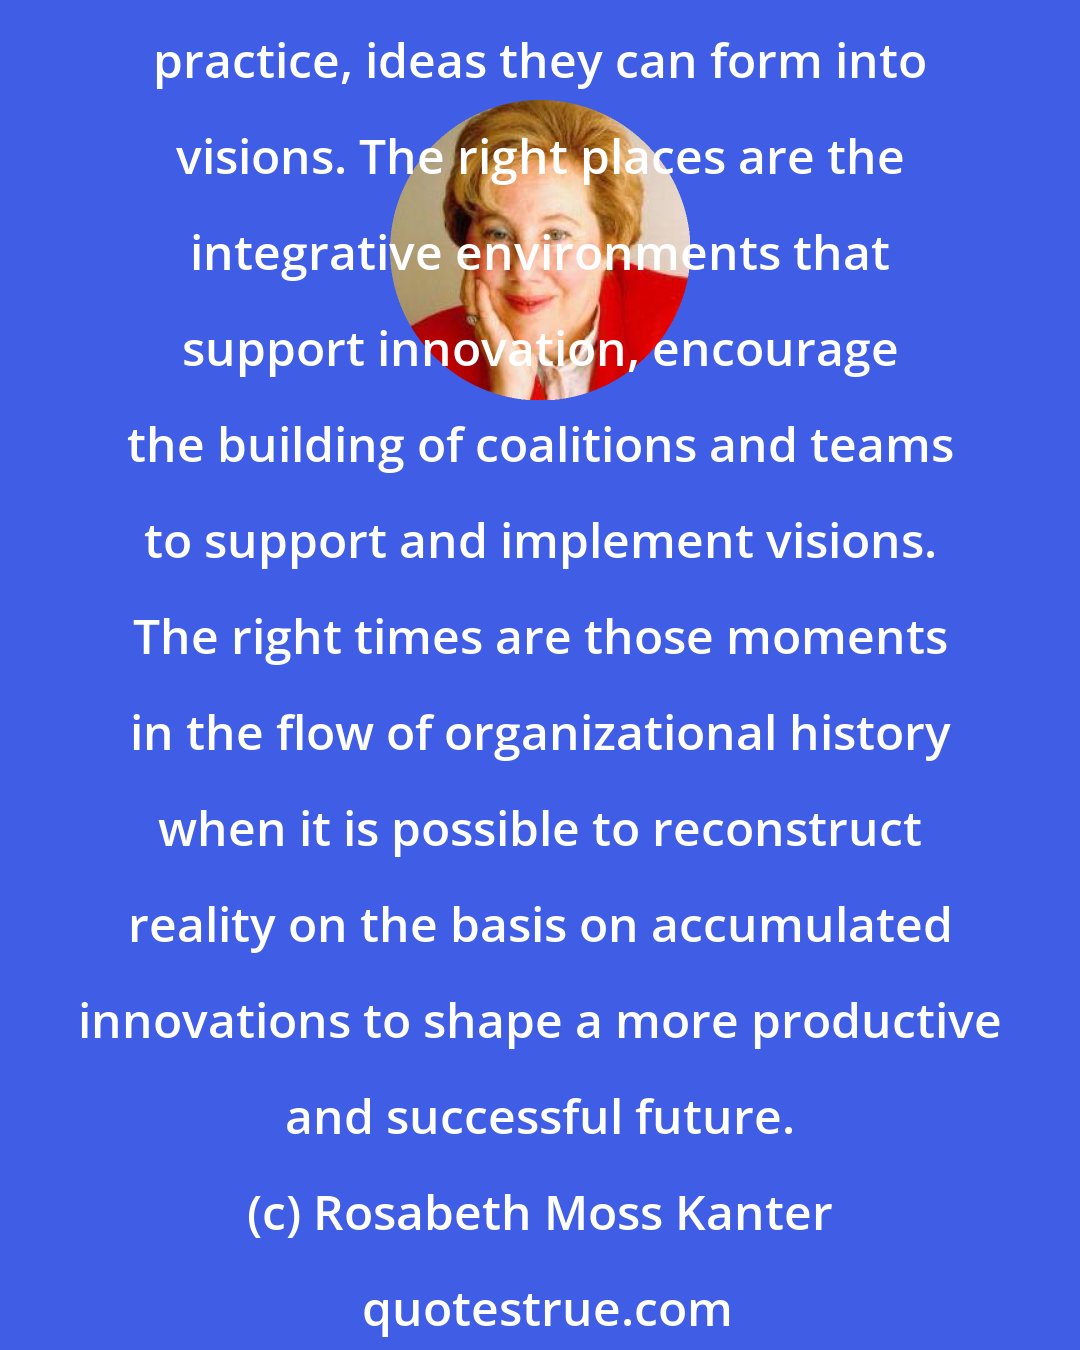 Rosabeth Moss Kanter: Change masters are - literally - the right people in the right place at the right time. The right people are the ones with the ideas that move beyond the organization's established practice, ideas they can form into visions. The right places are the integrative environments that support innovation, encourage the building of coalitions and teams to support and implement visions. The right times are those moments in the flow of organizational history when it is possible to reconstruct reality on the basis on accumulated innovations to shape a more productive and successful future.